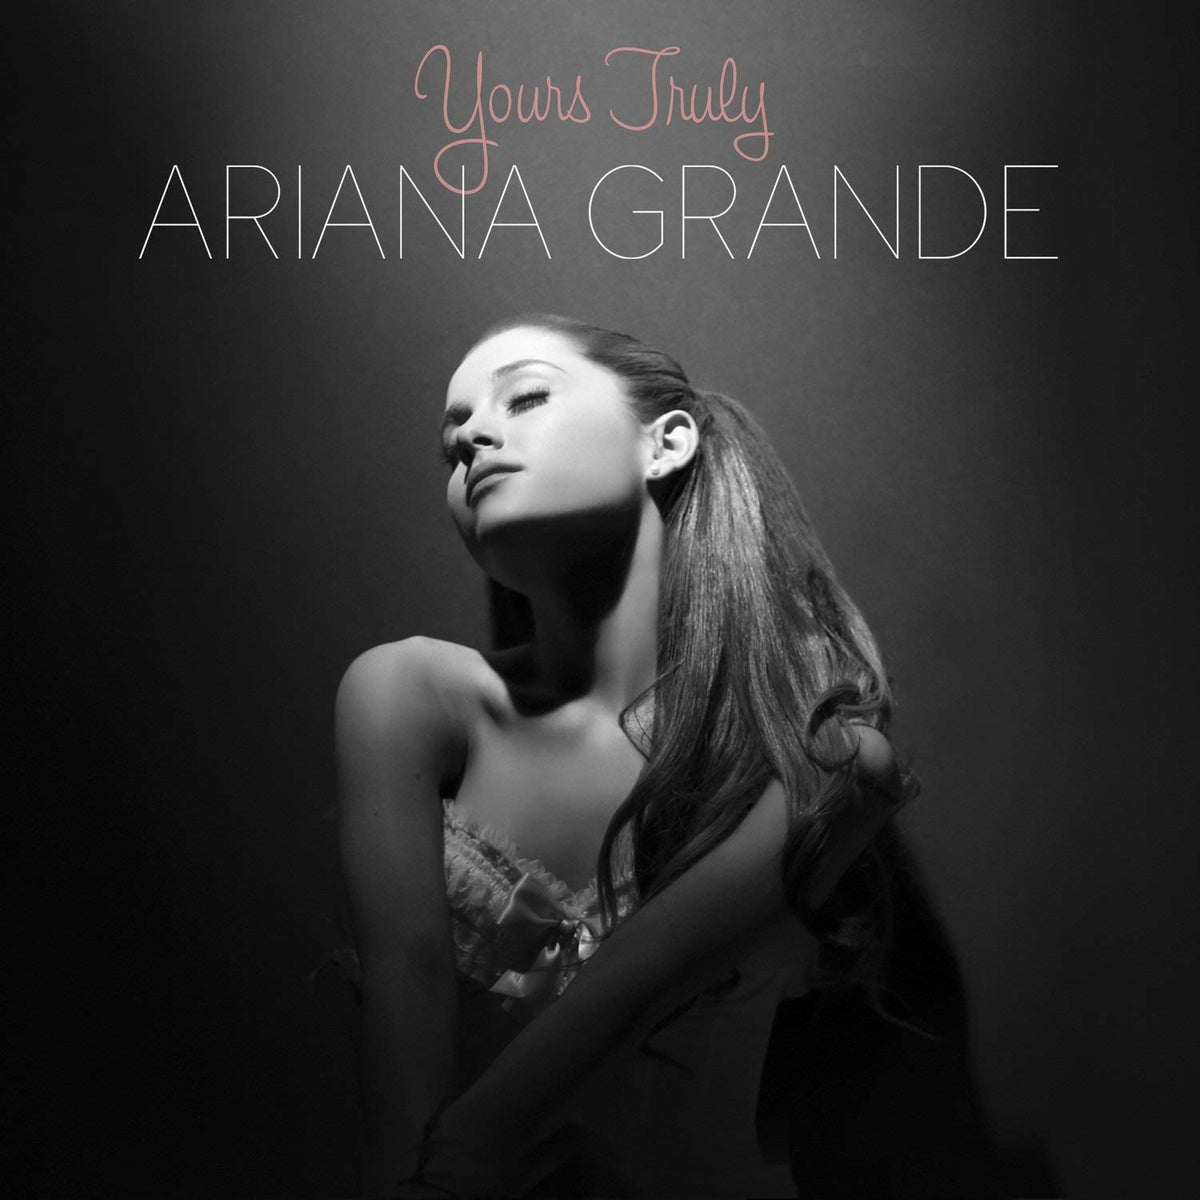 Ariana Grande - Yours Truly LP (180g, Gatefold)